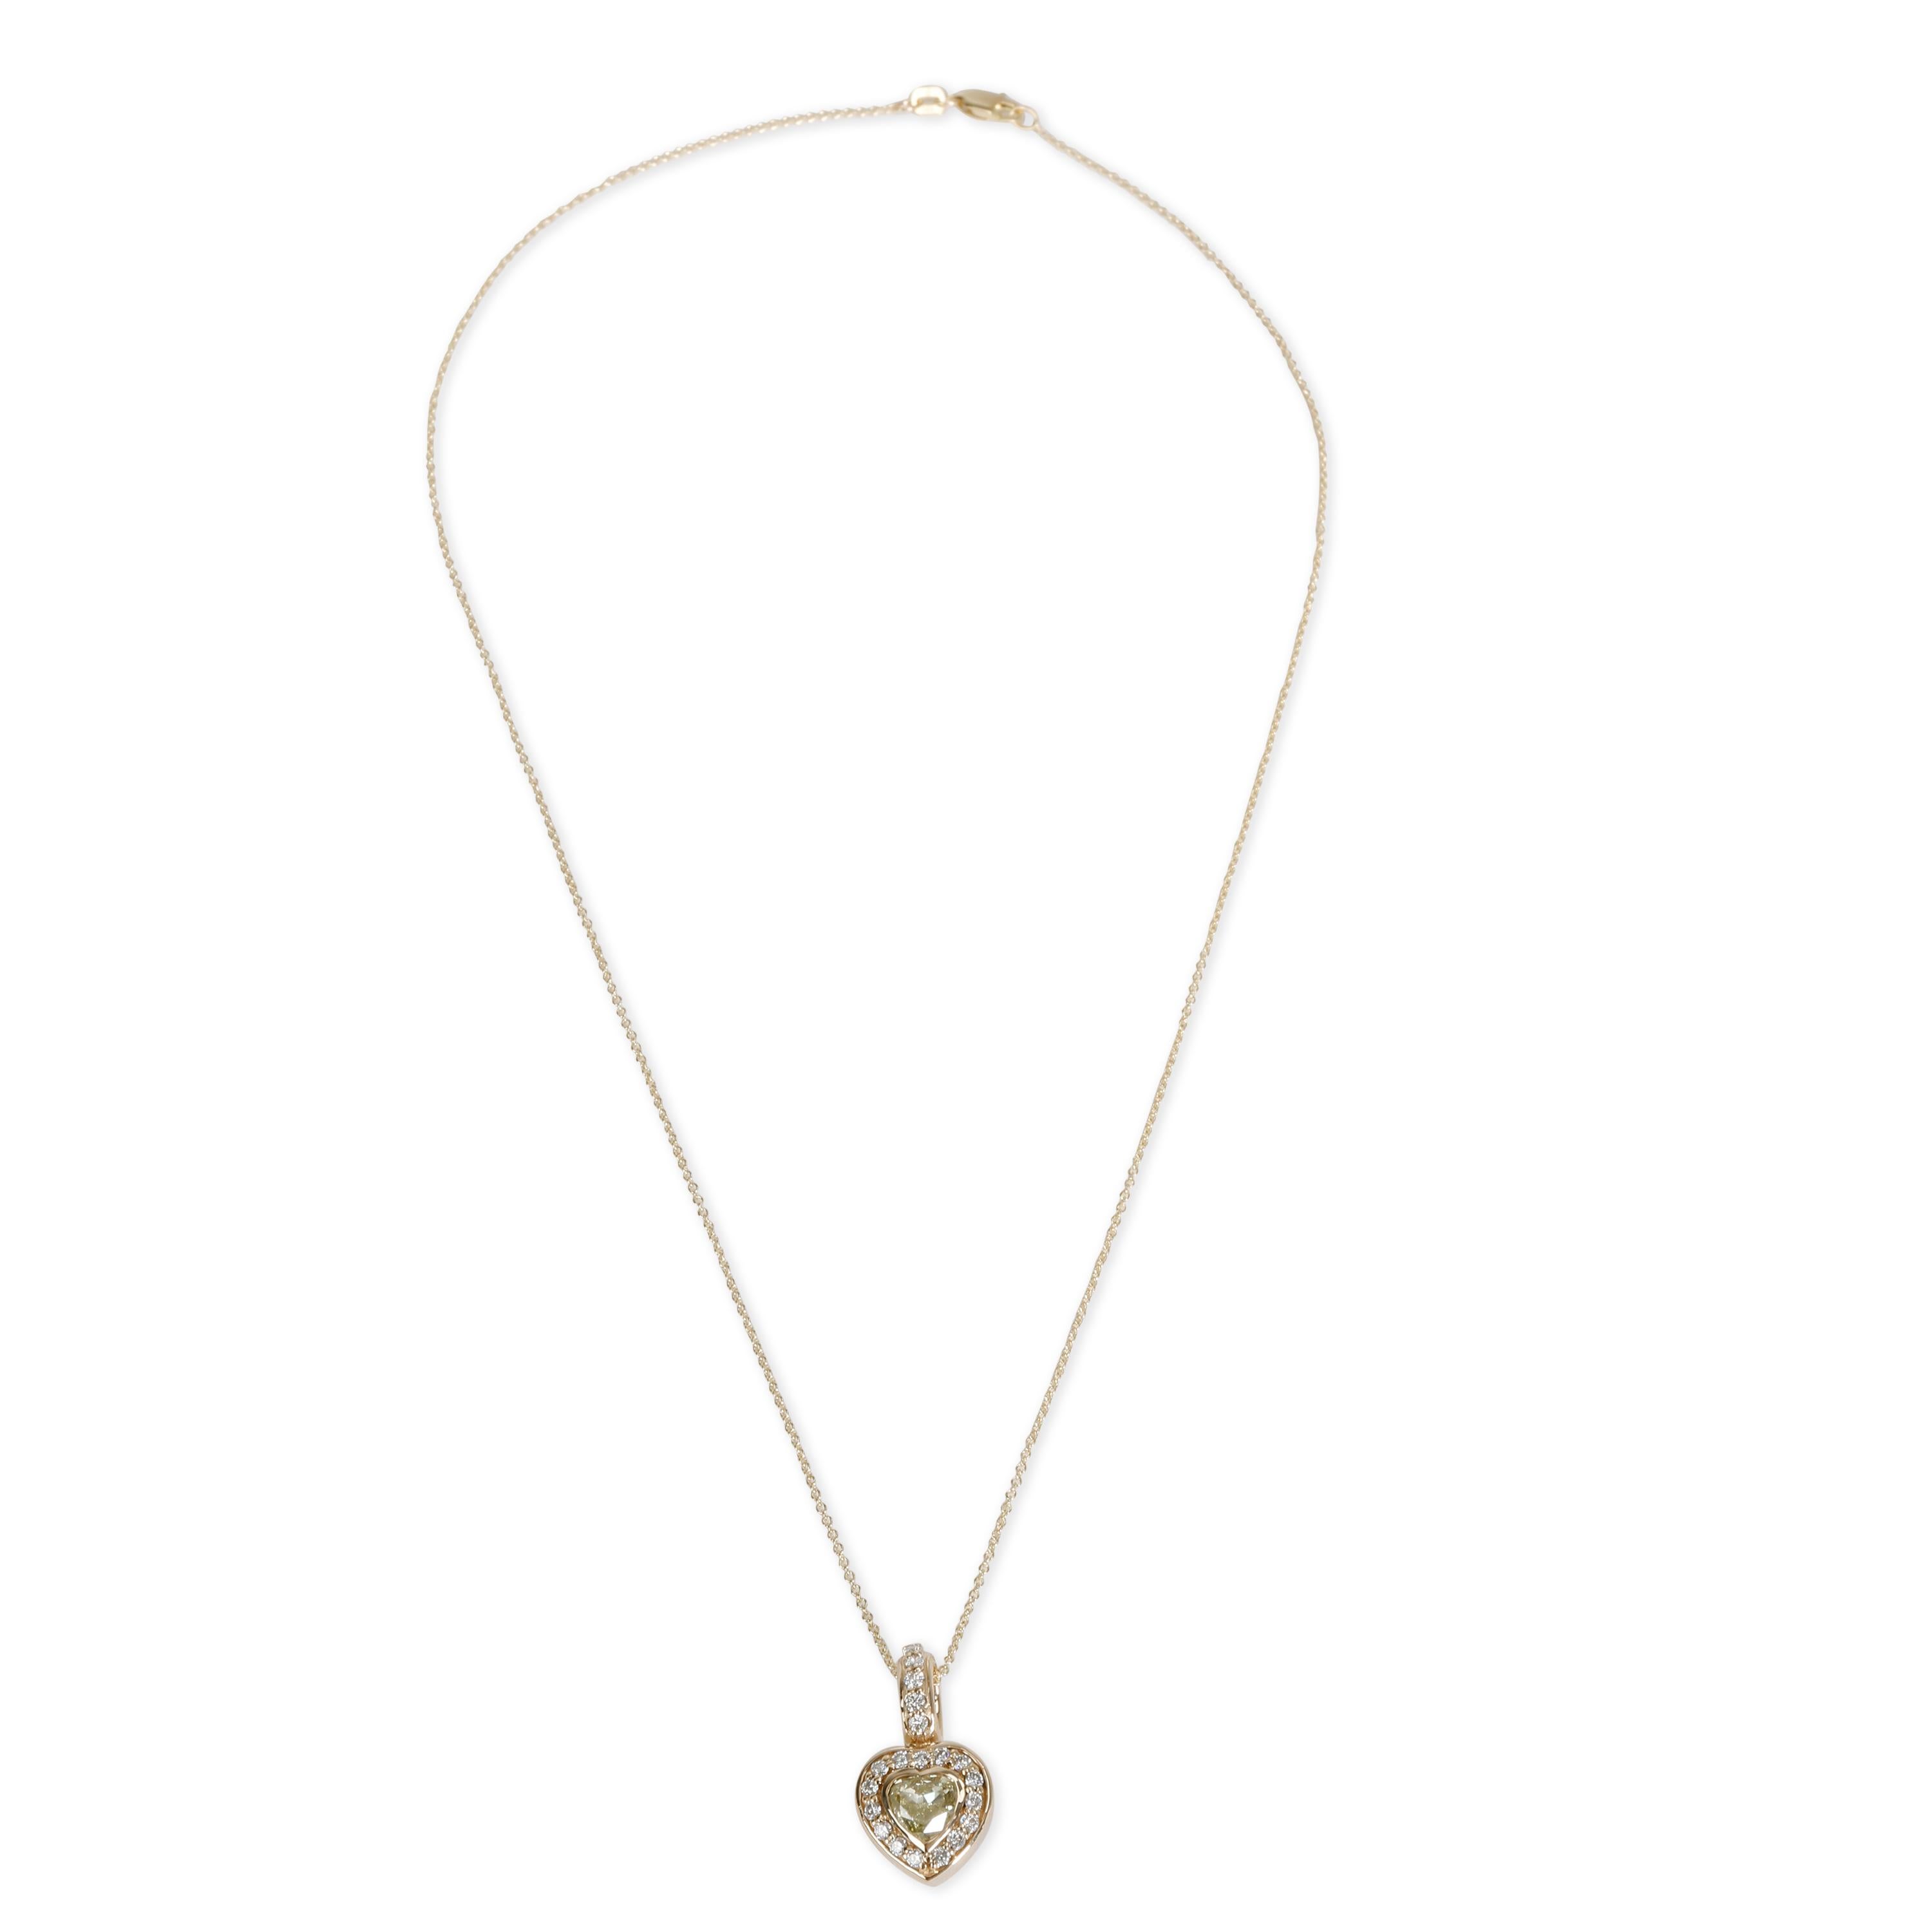 Fancy Yellow Heart Shape Diamond Halo Necklace in 14KT Yellow Gold 1.01 CTW

PRIMARY DETAILS
SKU: 078431
Listing Title: Fancy Yellow Heart Shape Diamond Halo Necklace in 14KT Yellow Gold 1.01 CTW
Condition Description: In excellent condition and